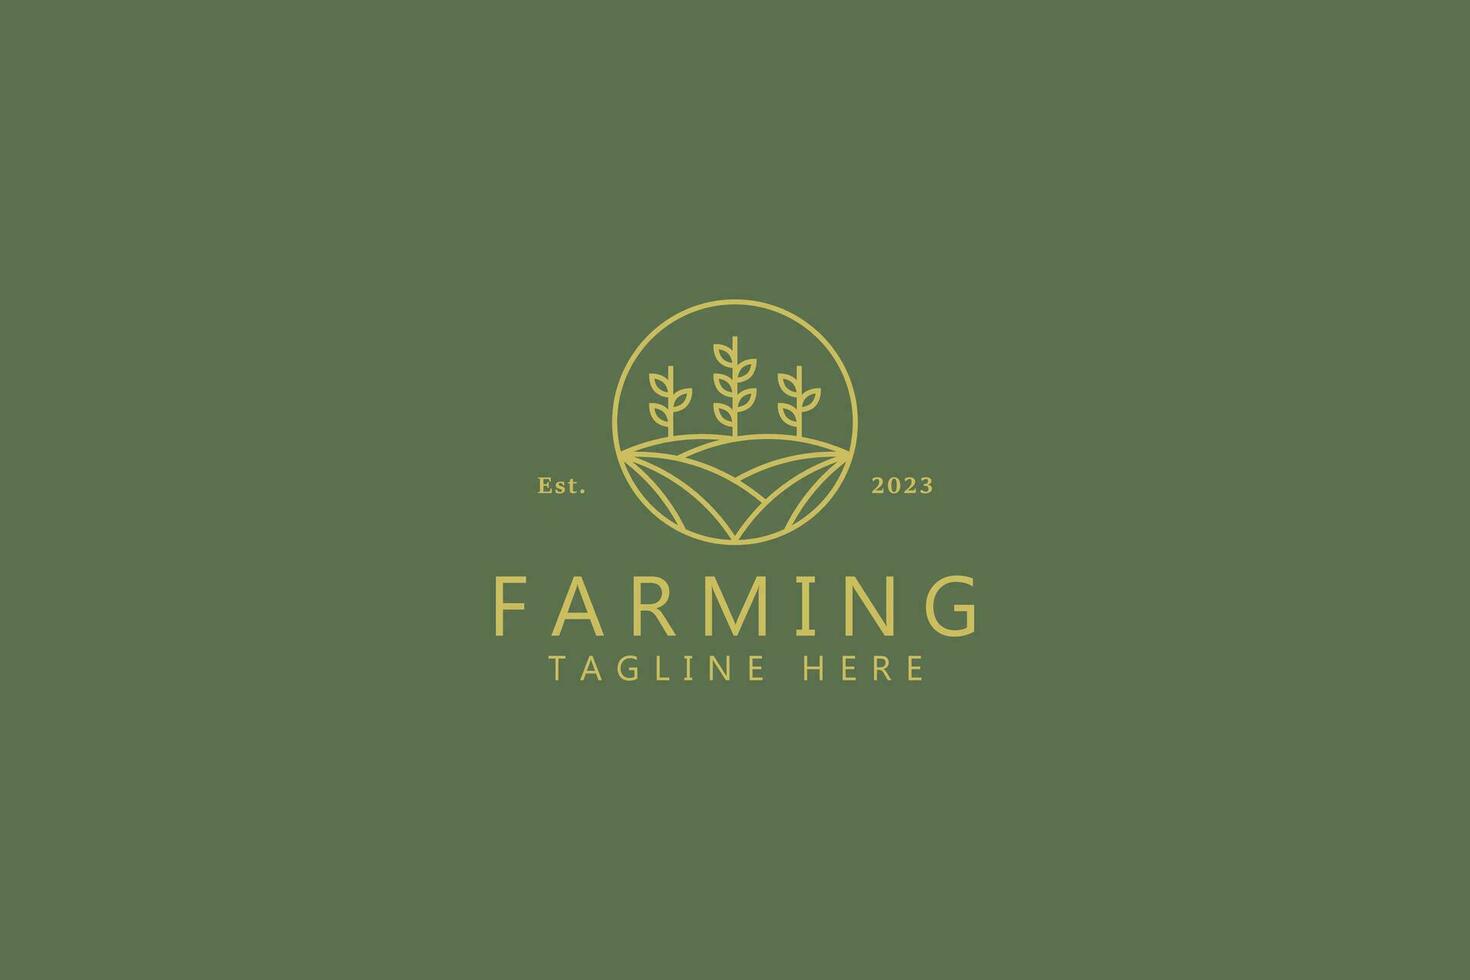 Farm Agriculture Wheat Organic Plant Industry Business Logo Template vector